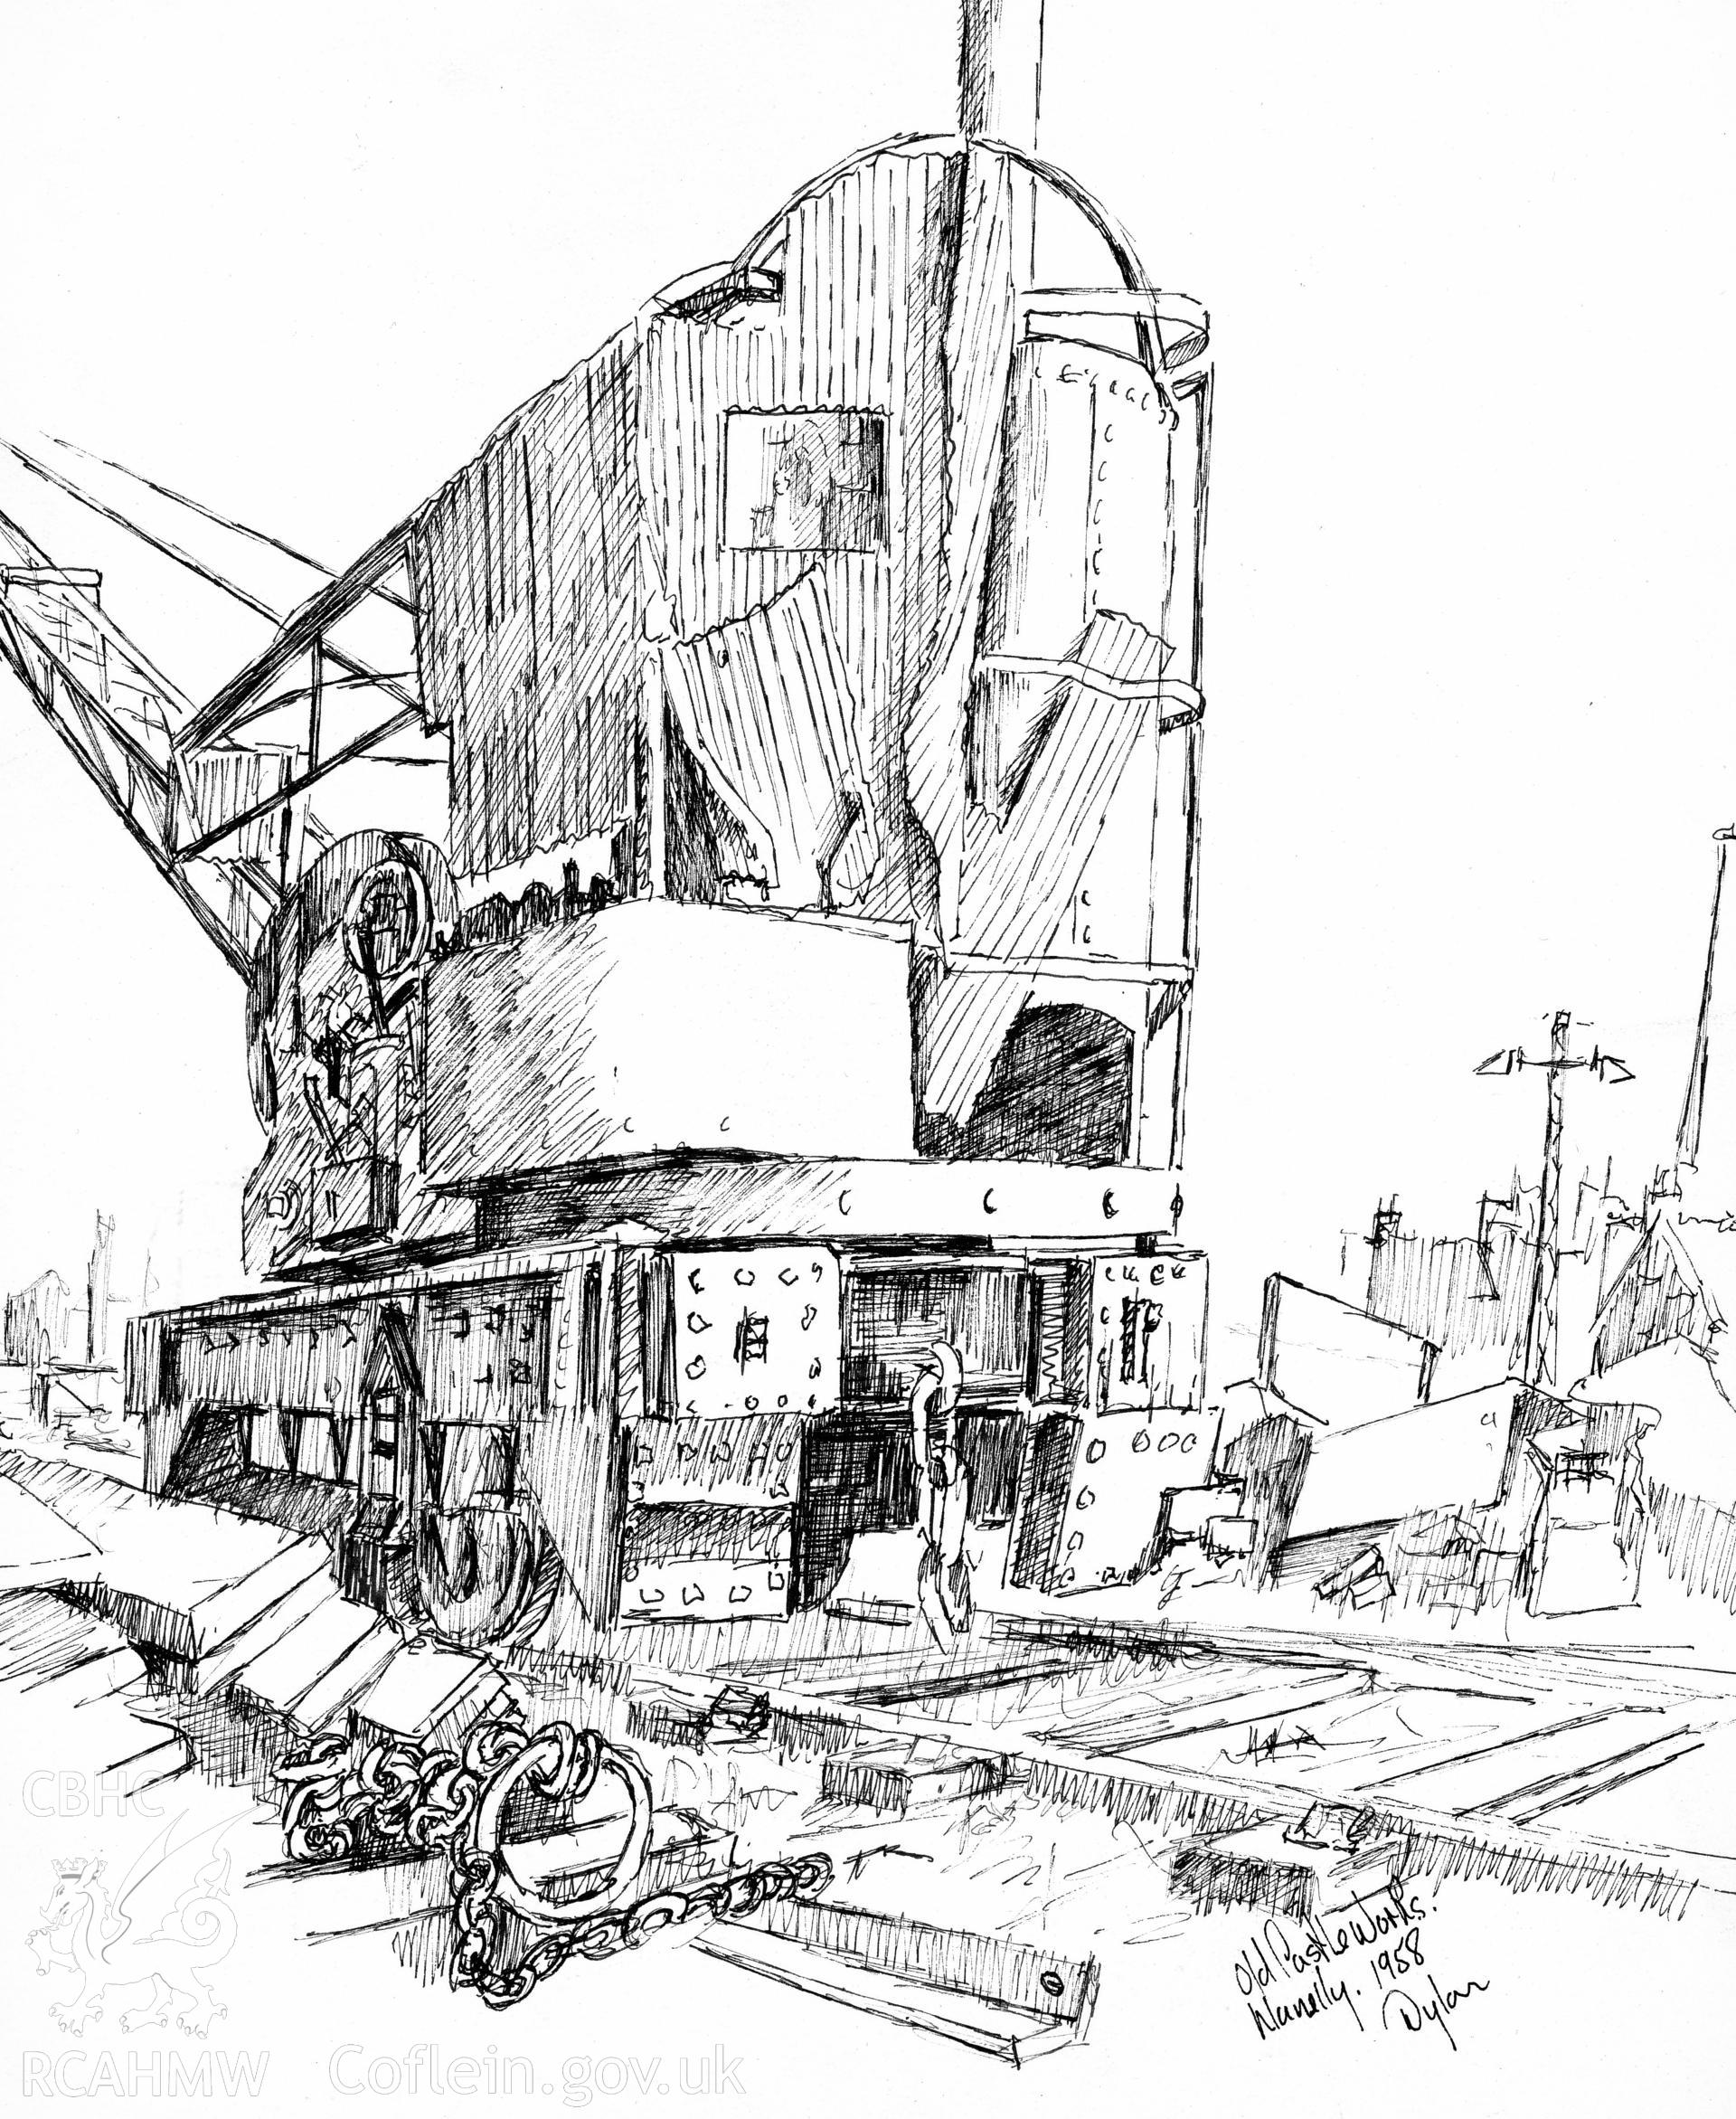 Pen and ink sketch by Dylan Roberts,  of crane machinery at the Old Castle Works, Llanelli.